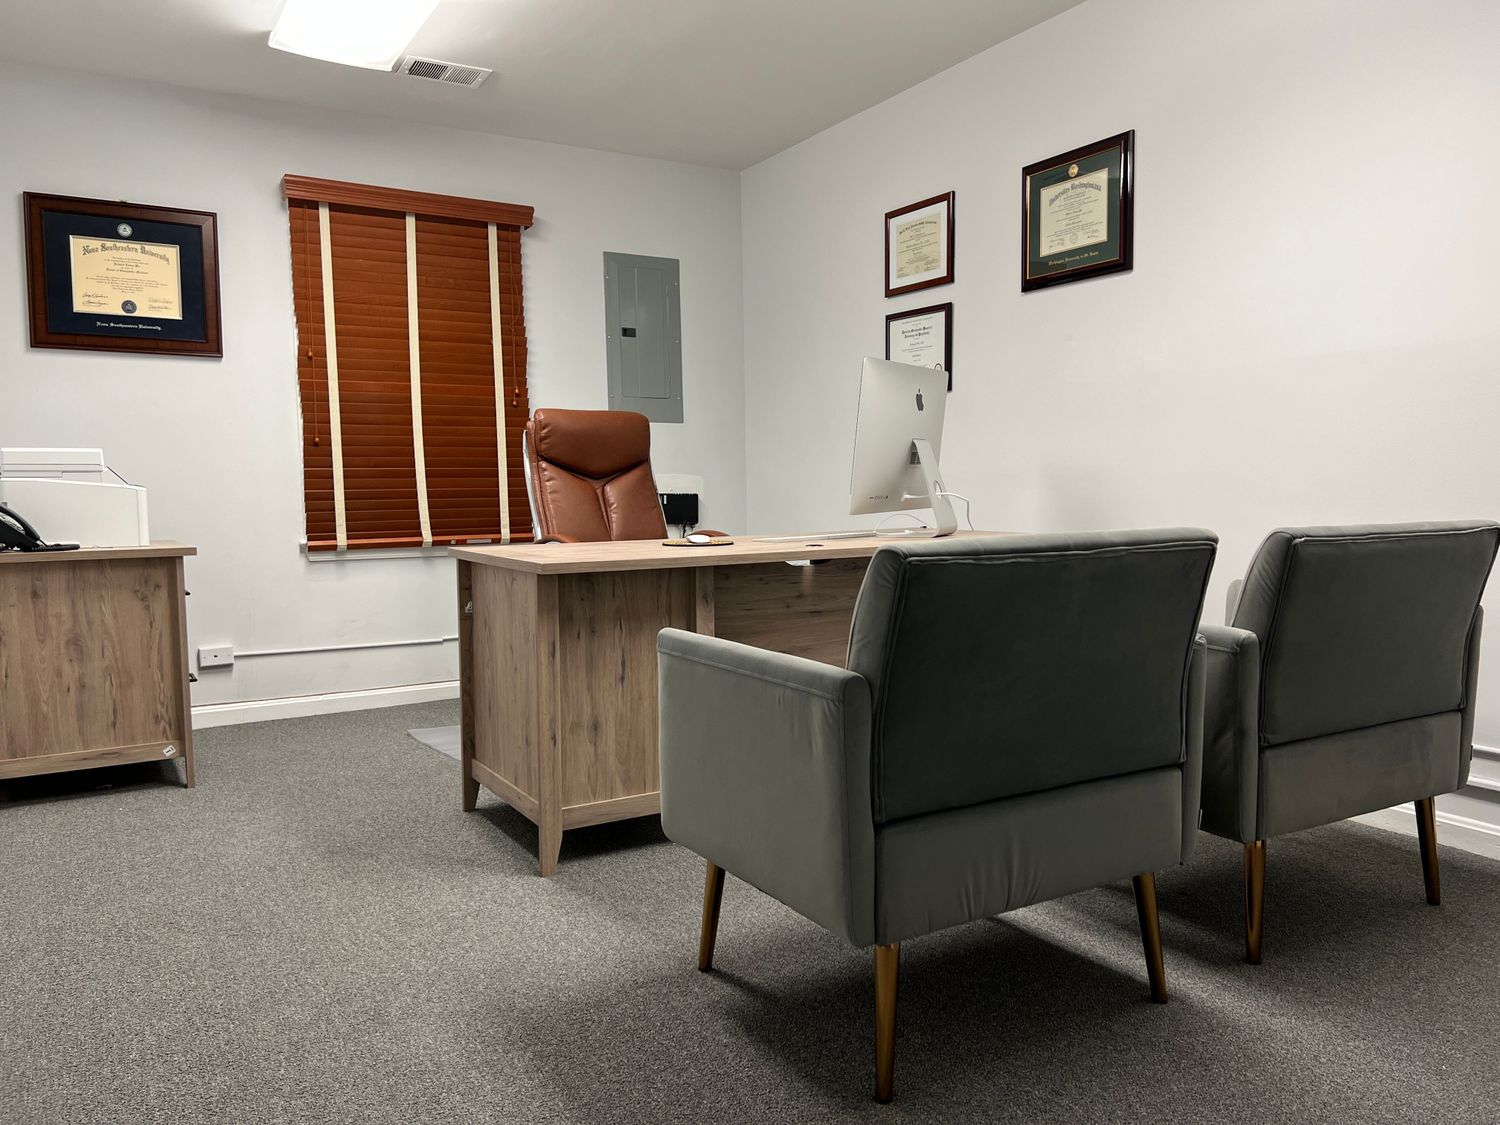 Gallery Photo of Office Room